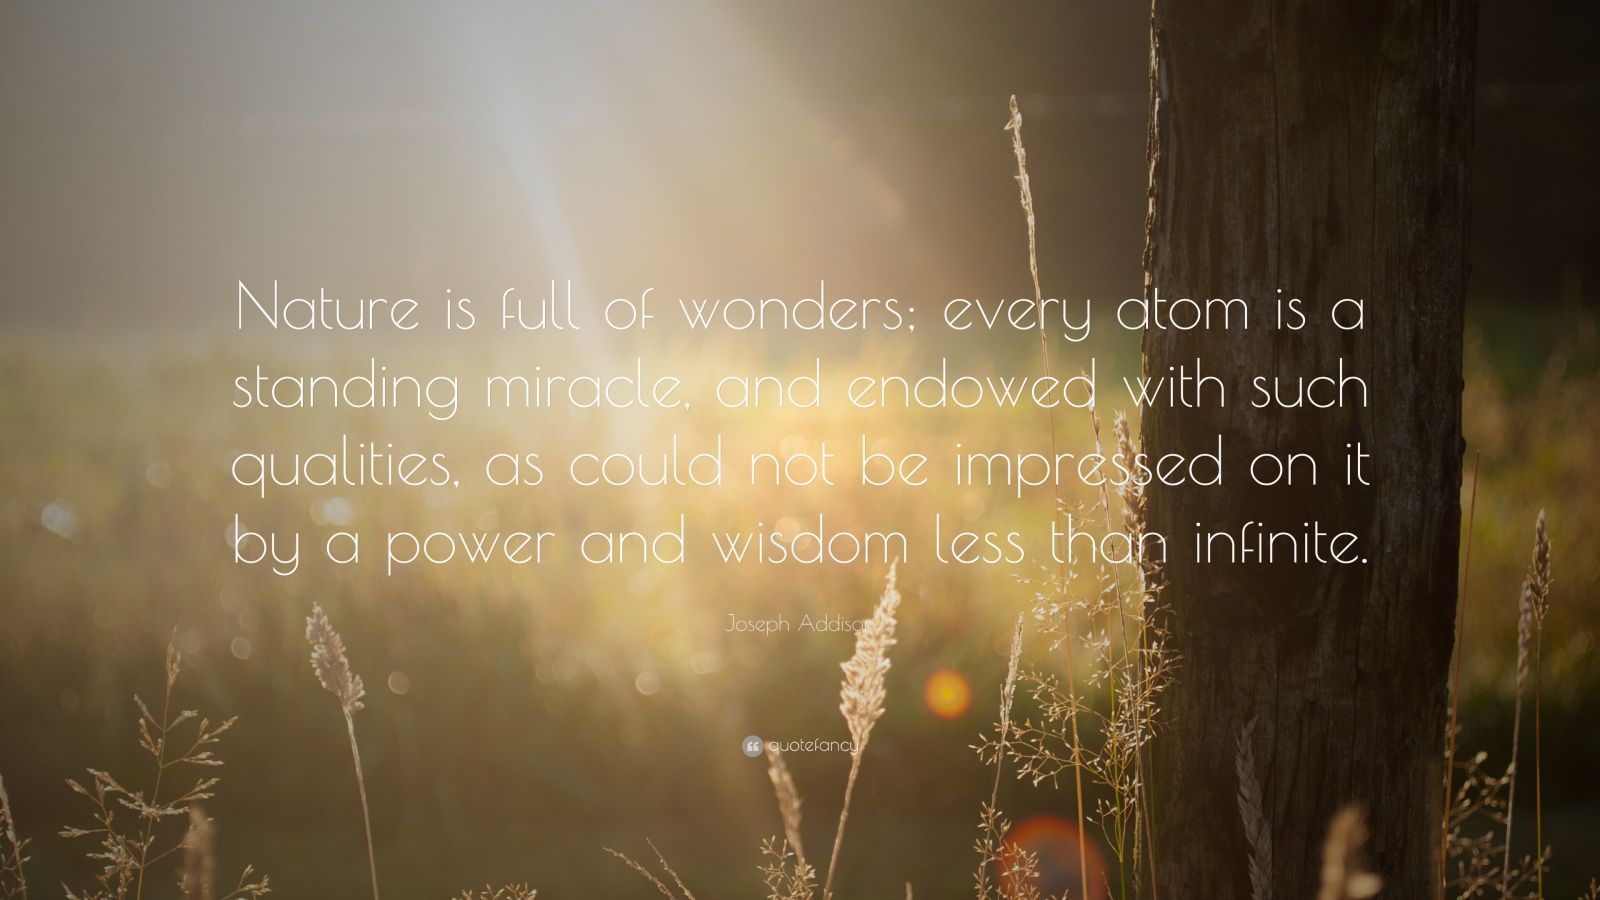 Joseph Addison Quote: “Nature is full of wonders; every atom is a ...